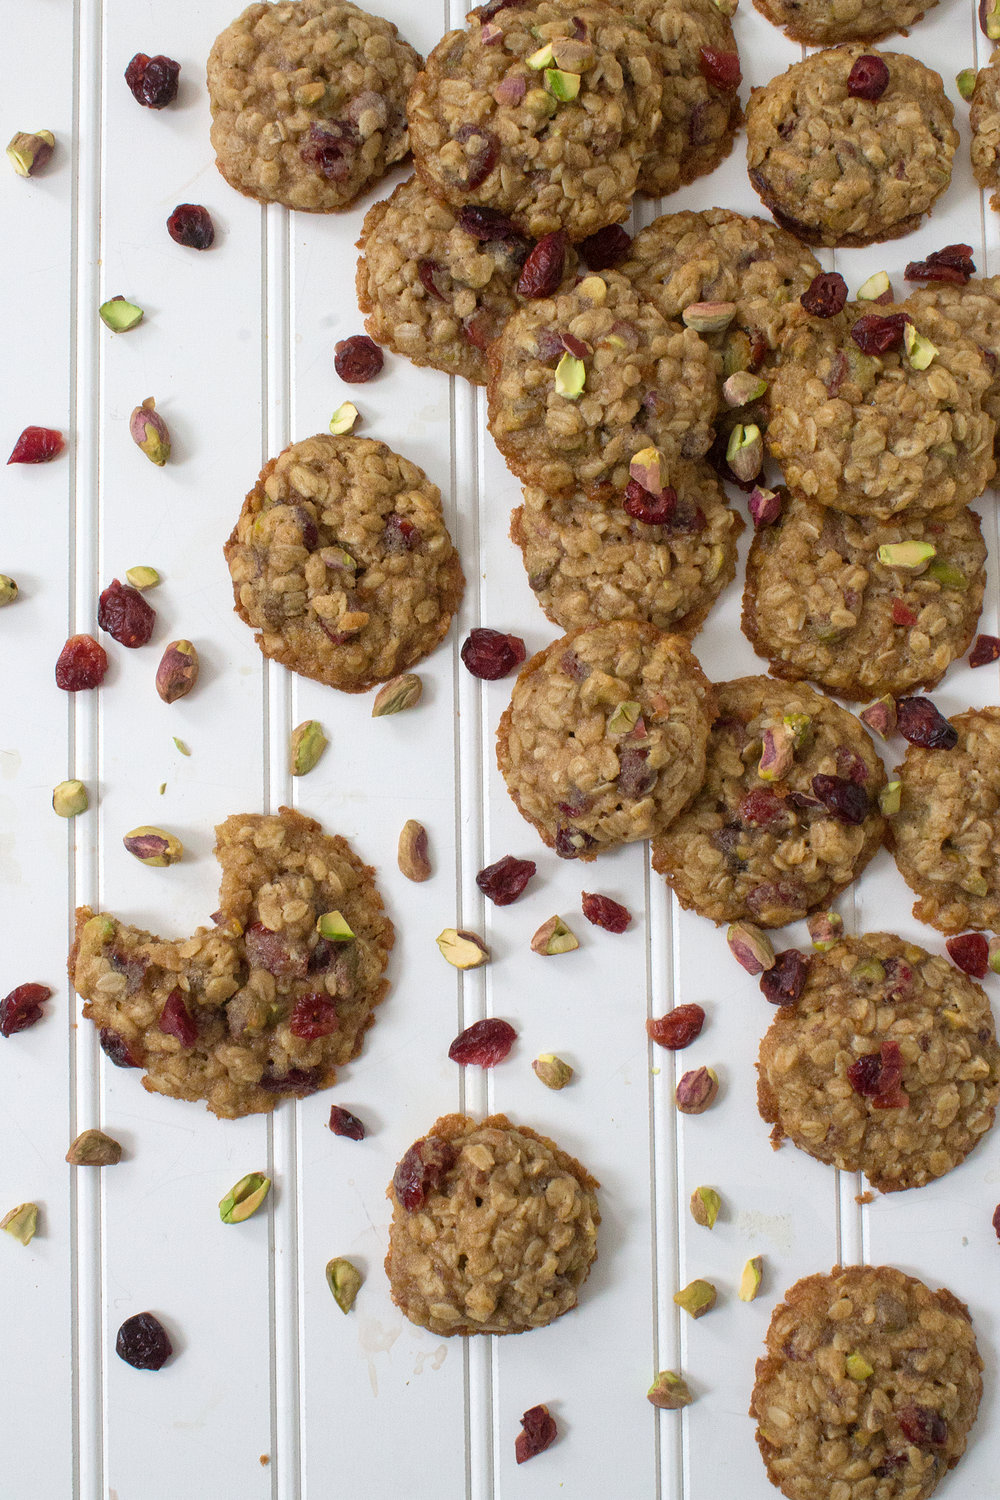 Oatmeal Cookies with Pistachios and Cranberries. Grab the recipe: Unusuallylovely.com